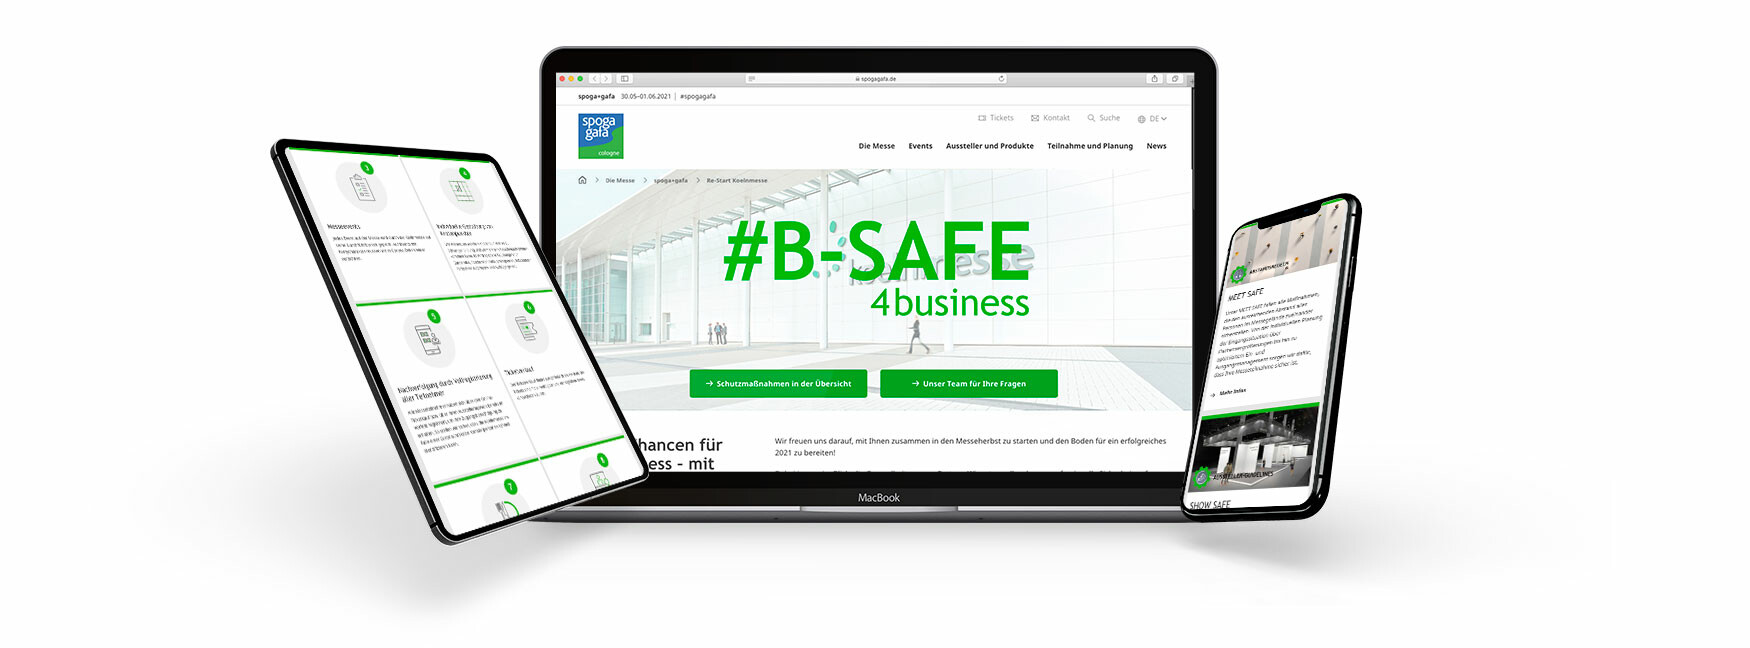 Campaigns B-SAFE4business Koelnmesse